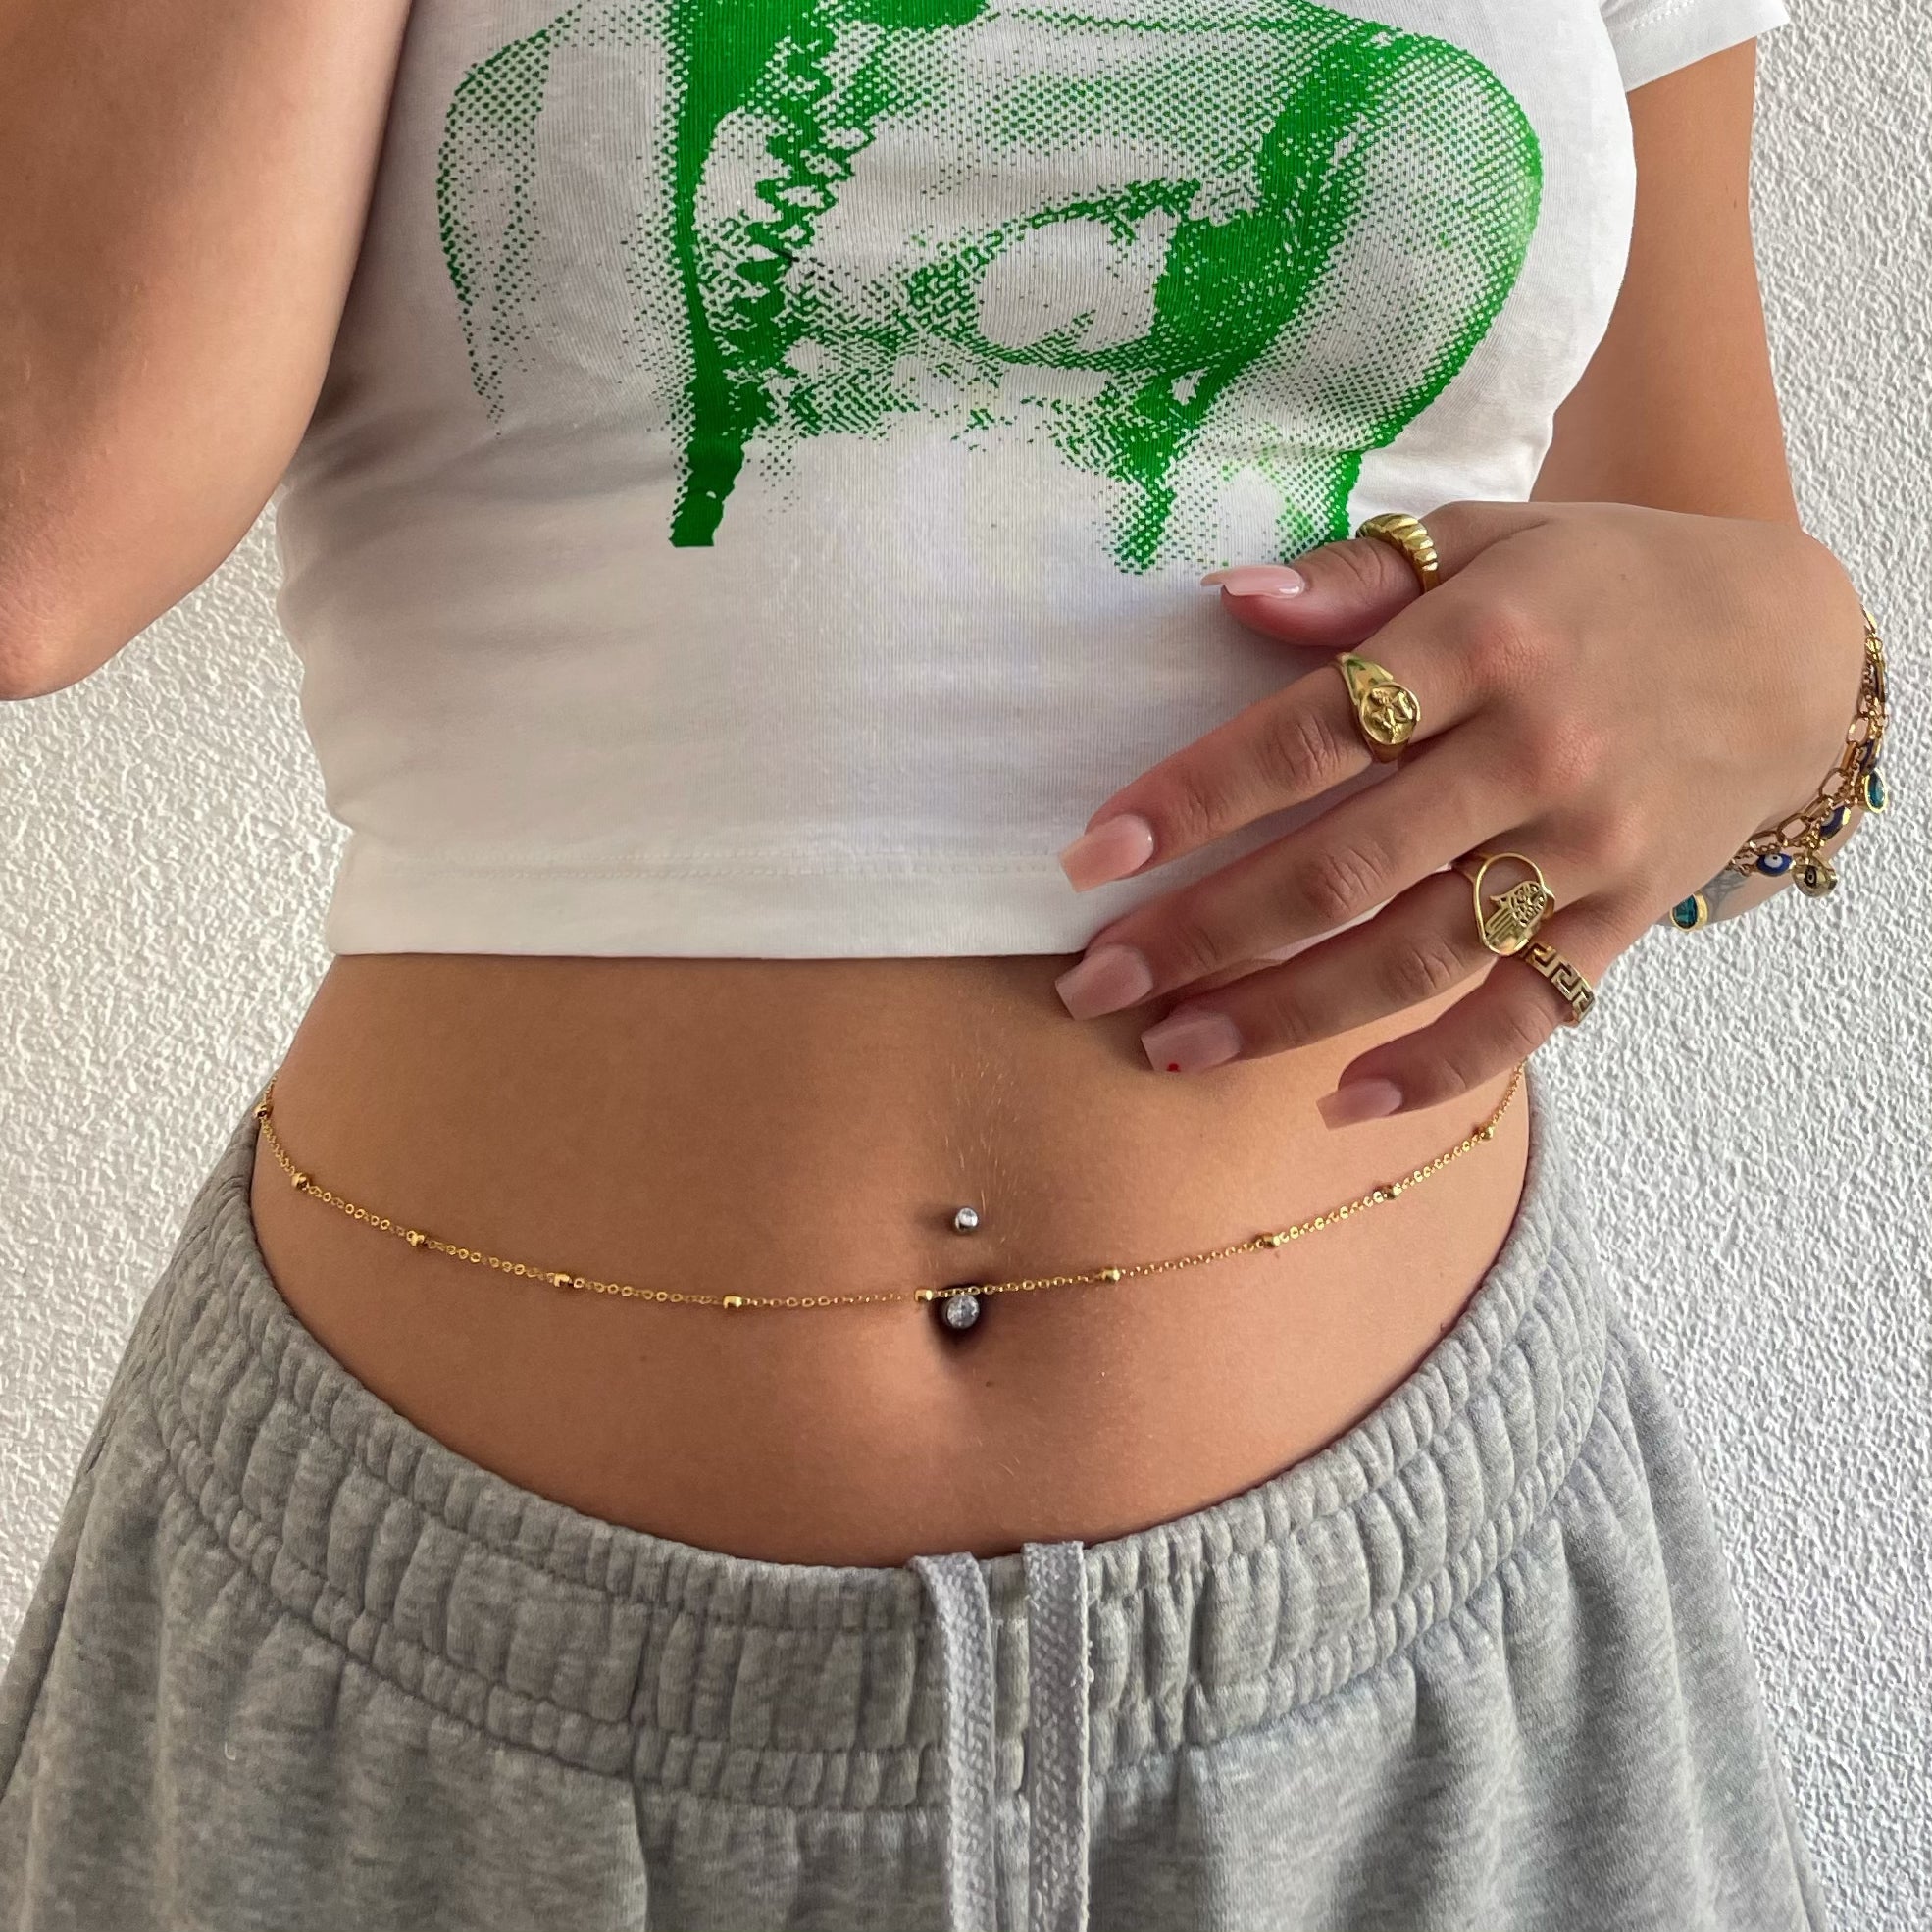 18k Solid Gold Luxury Waist Beads, Gold Belly Chain, Gold Waist Beads, 18k Gold Dainty Body Chain